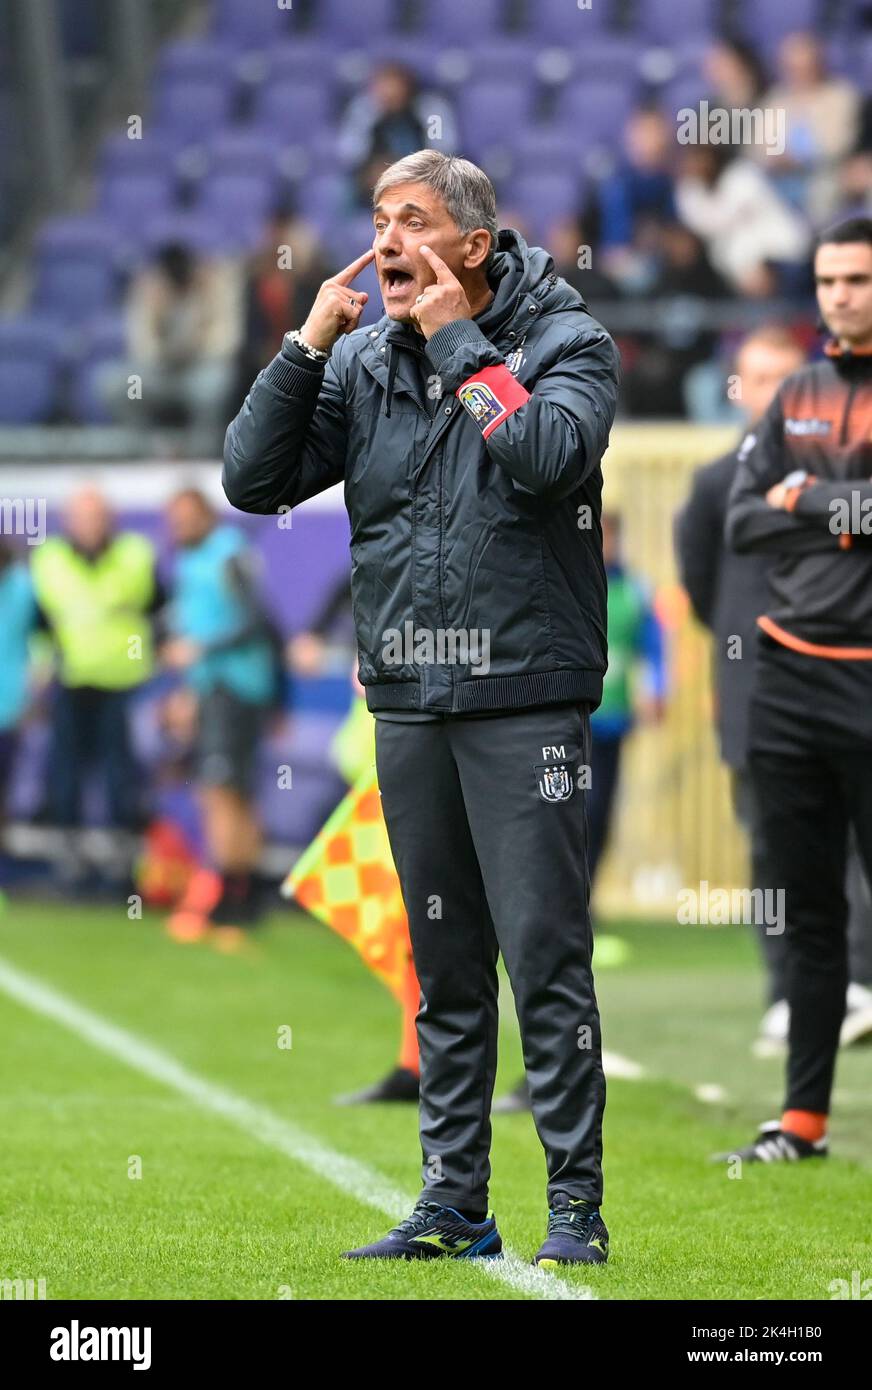 Anderlecht head coach Felice Mazzu reacts during a soccer match between RSCA Anderlecht and Sporting Charleroi, Sunday 02 October 2022 in Anderlecht, on day 10 of the 2022-2023 'Jupiler Pro League' first division of the Belgian championship. BELGA PHOTO JOHN THYS Stock Photo